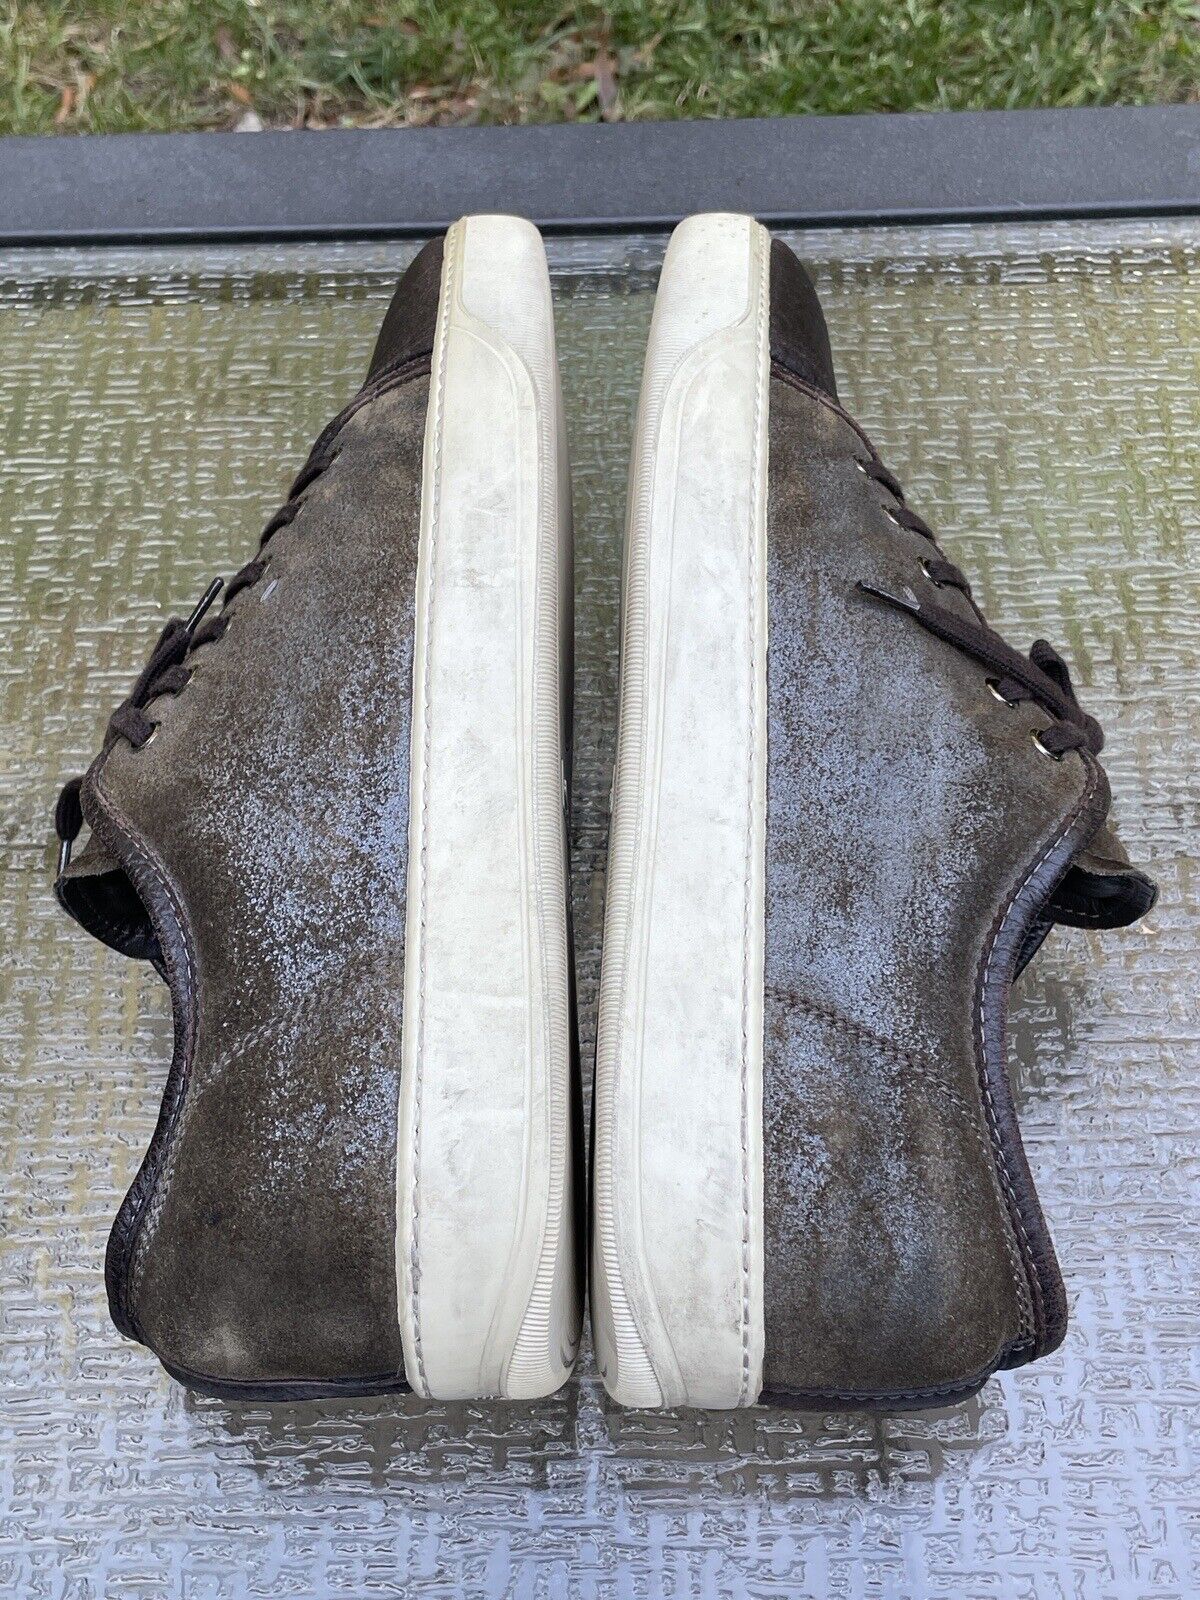 $450 Santoni ACADIA Distressed Brown Leather Sneakers Shoes MADE in ITALY